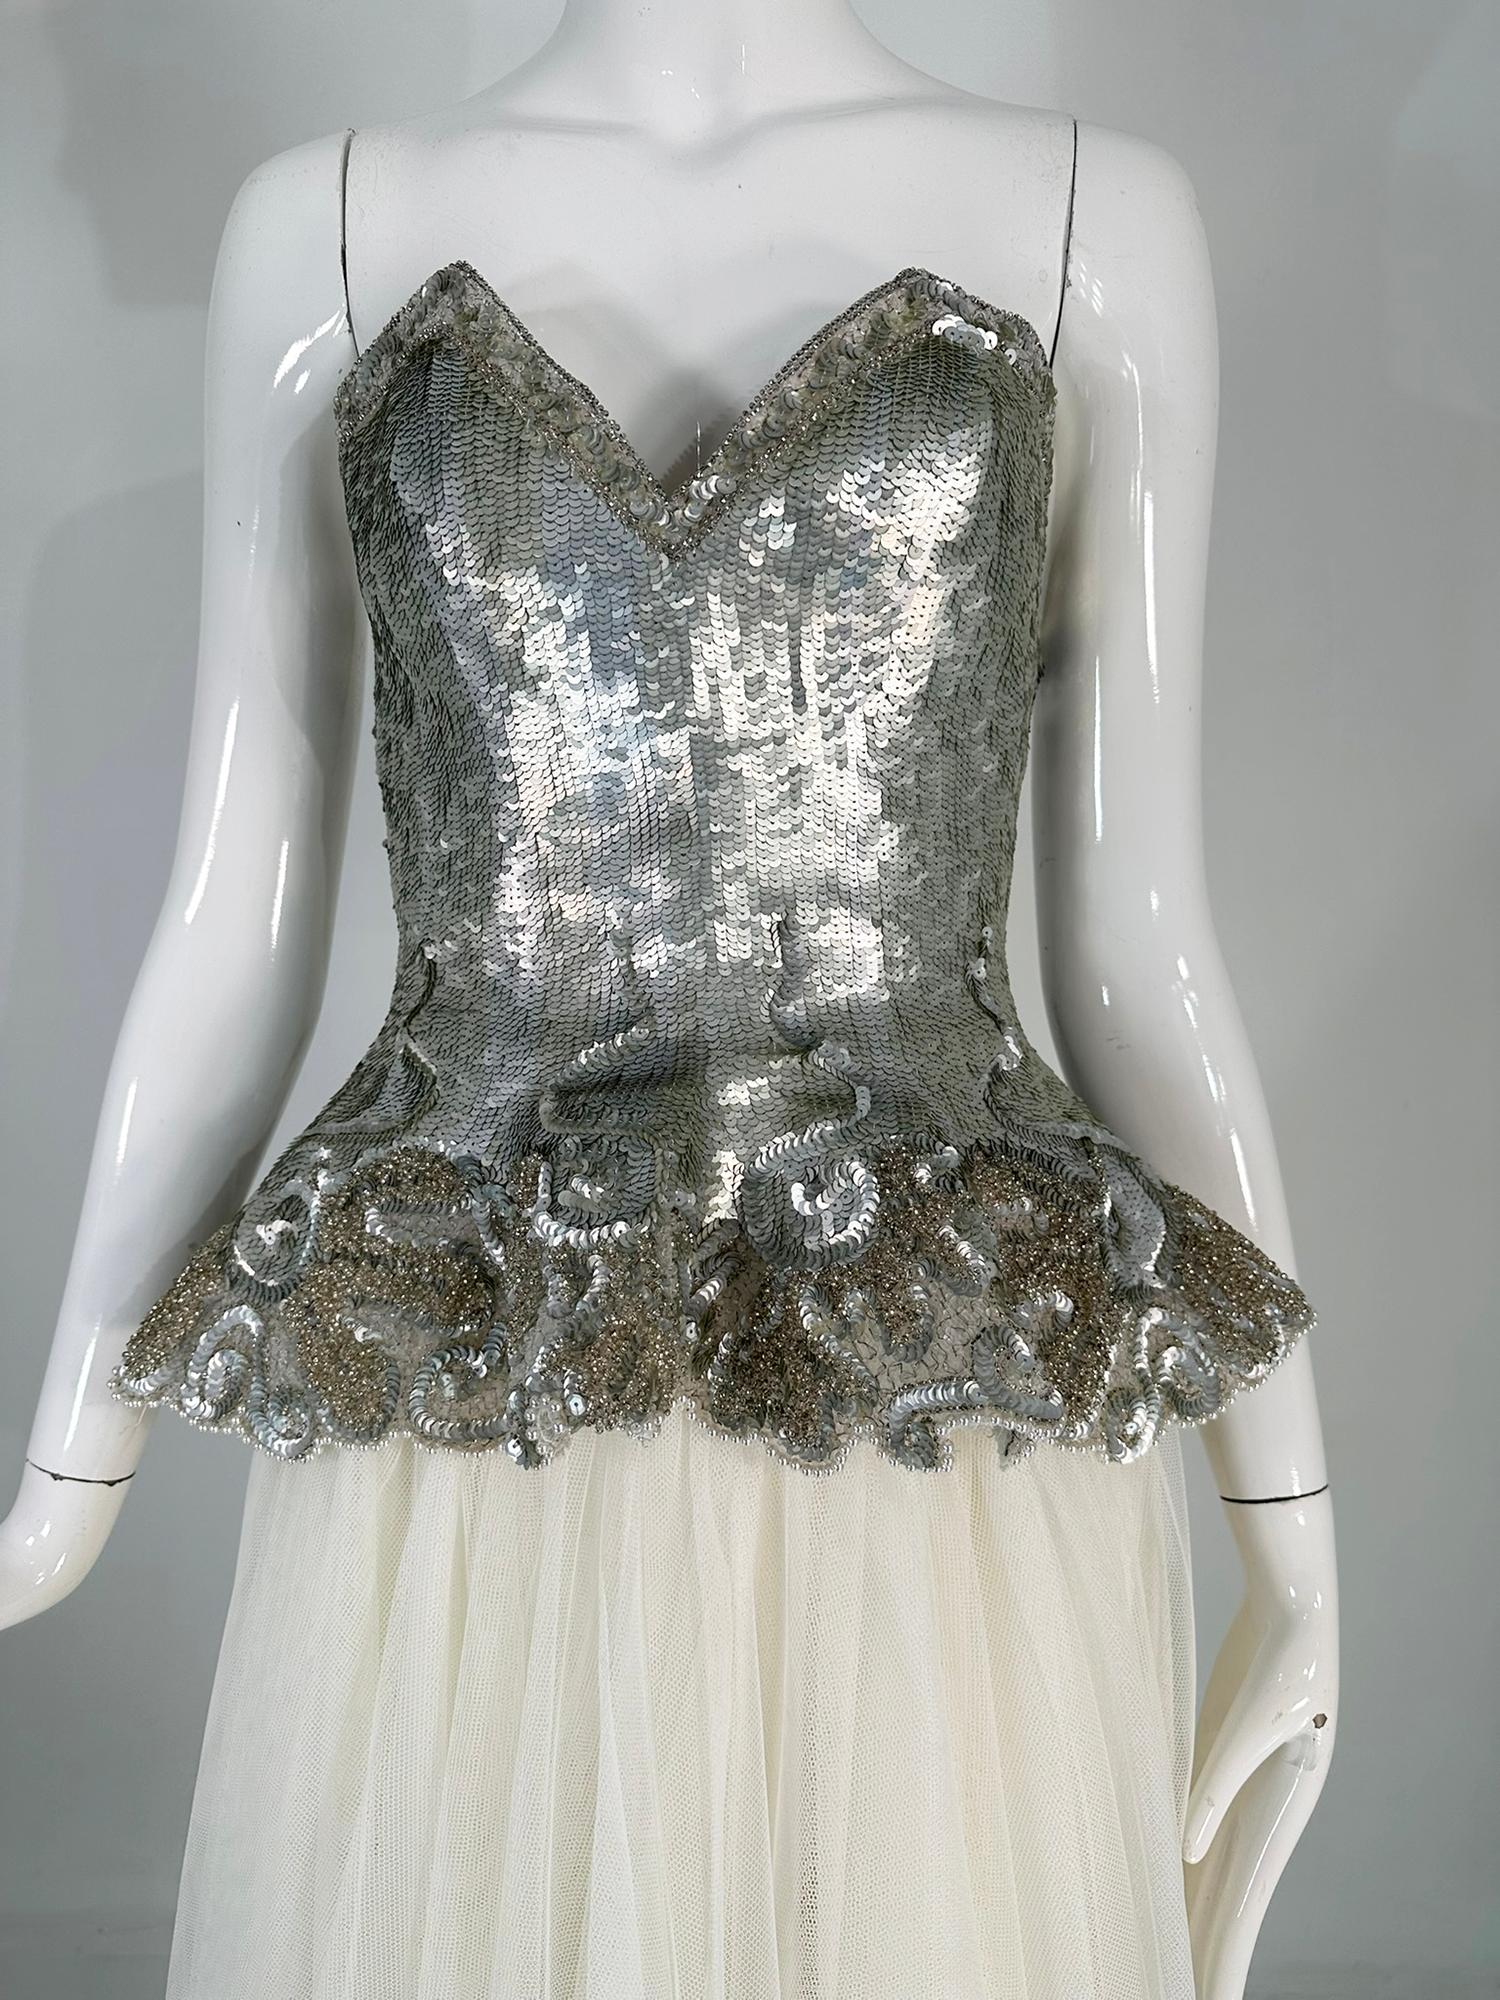 Fabrice Gold & Silver Sequin Peplum Hem Bustier with White Tulle Layered Skirt 10